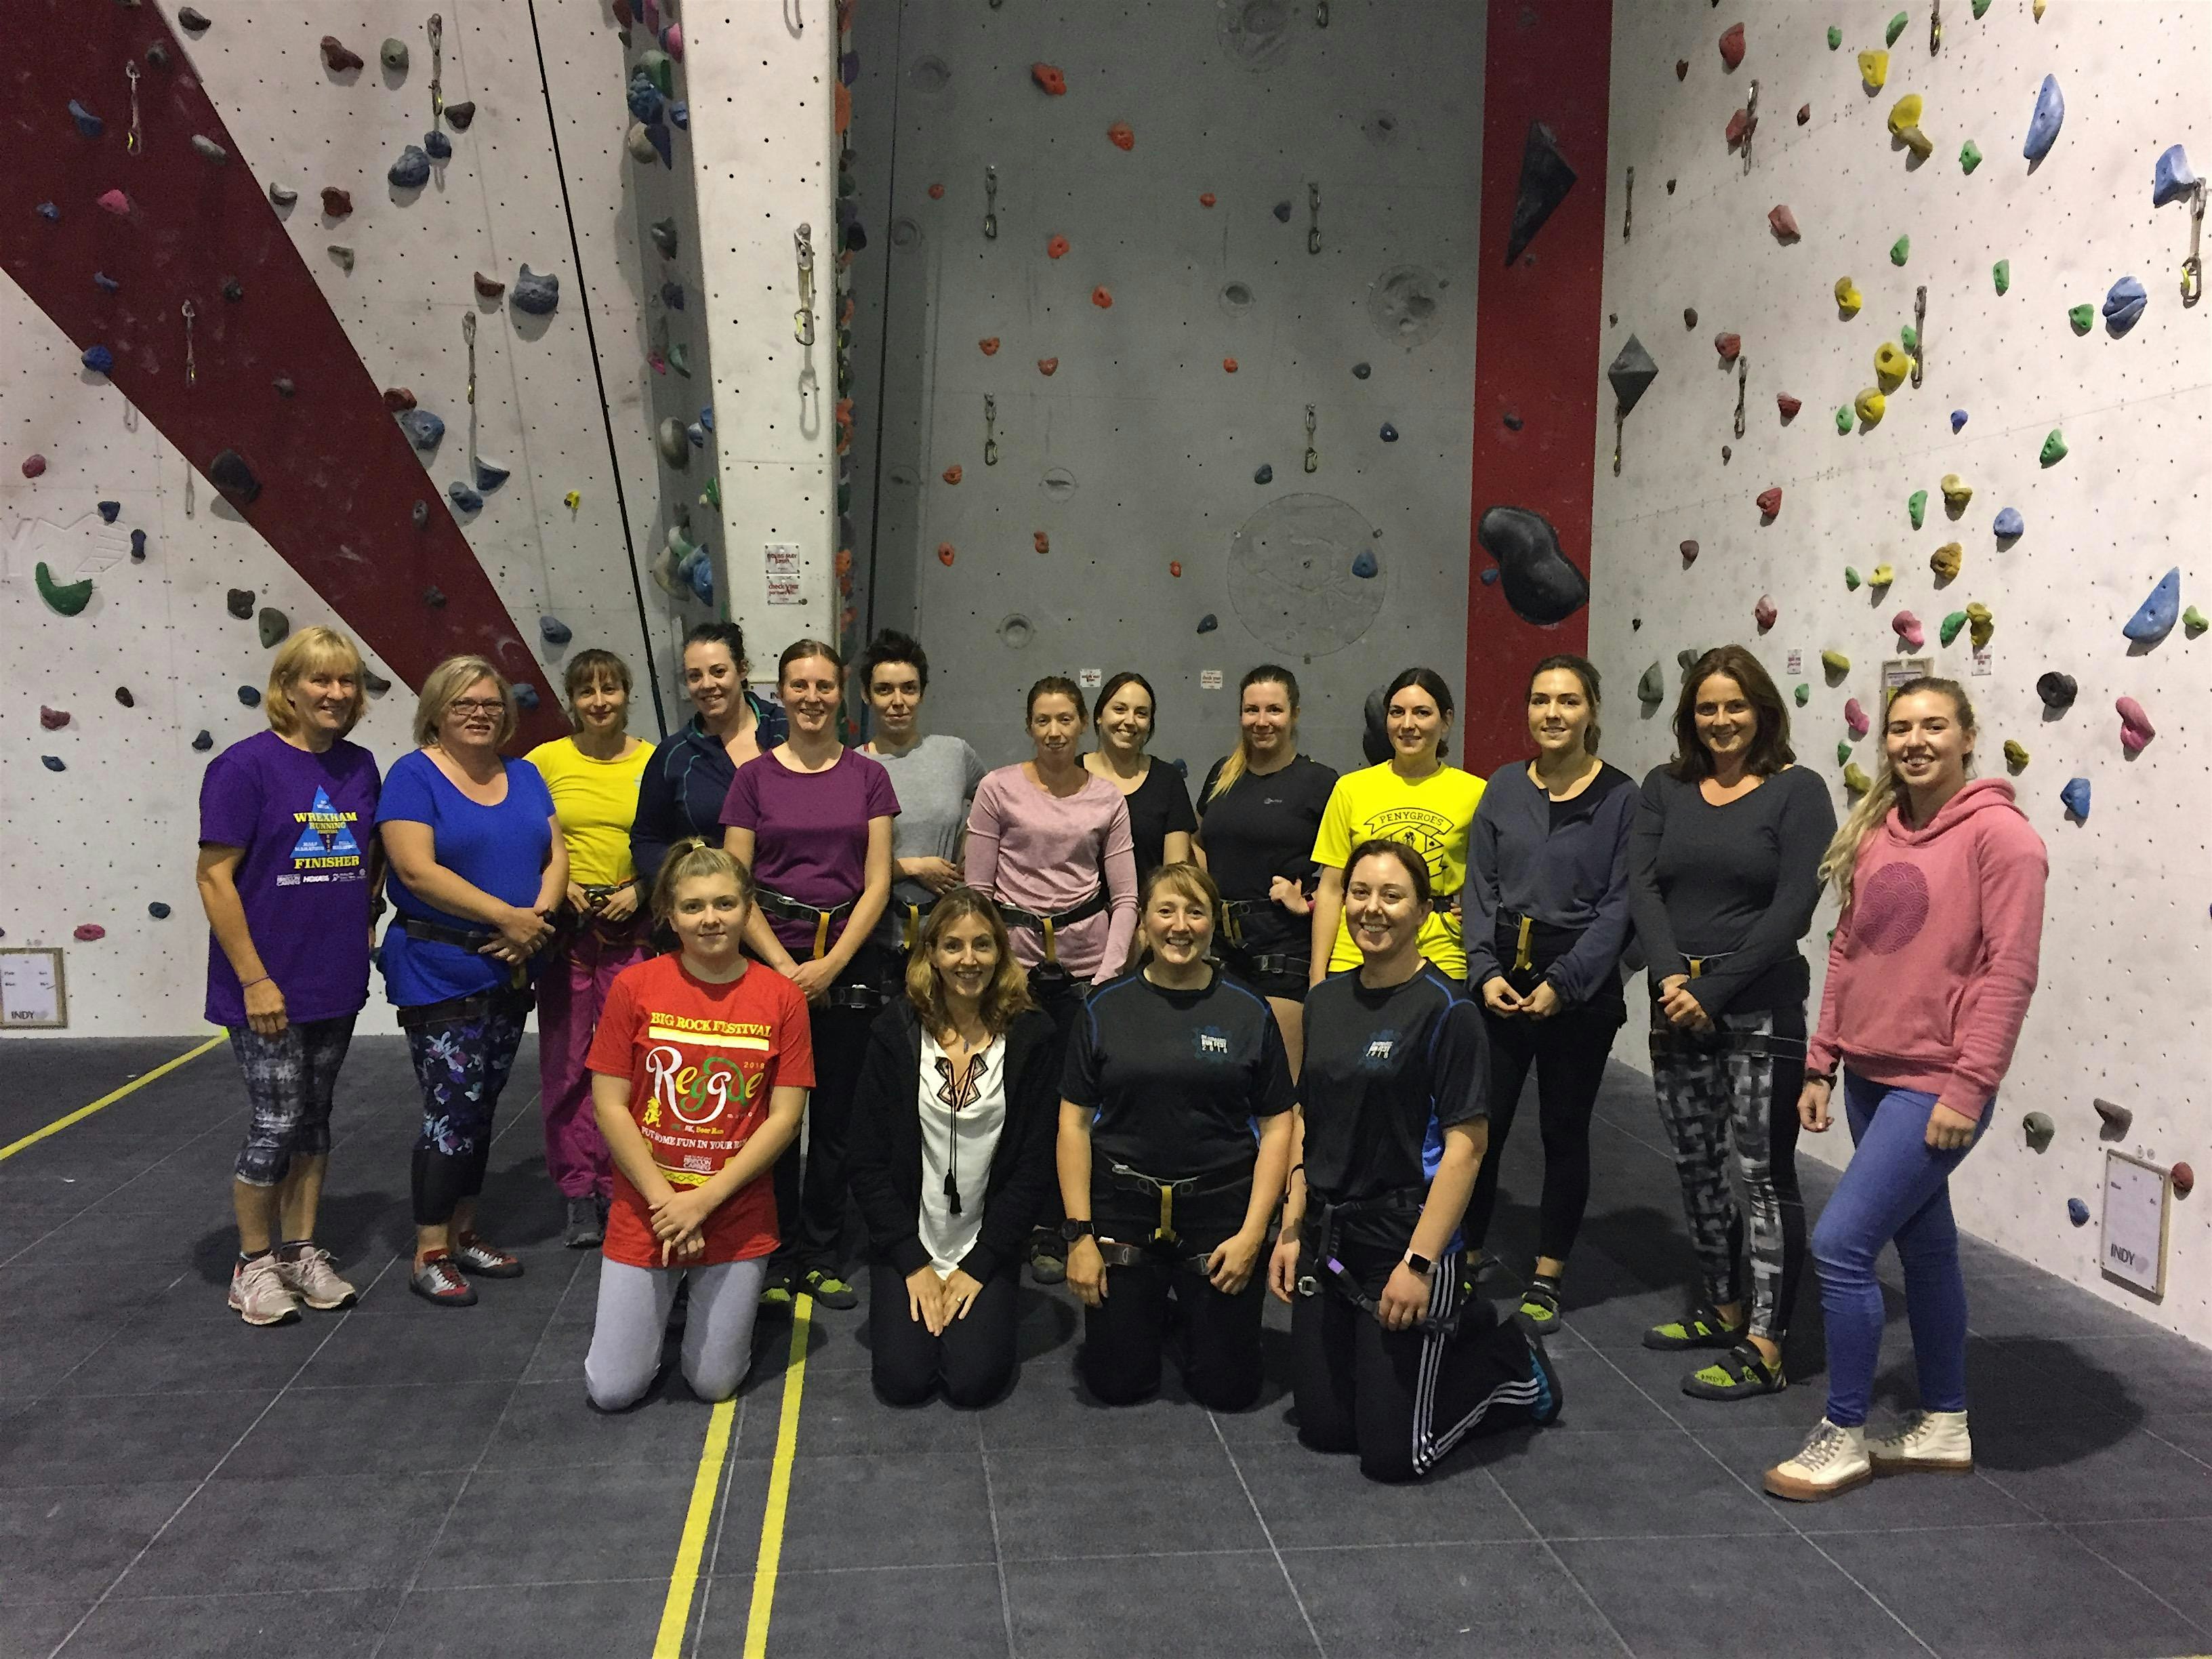 Beginners Climbing Course for women in West Cumbria